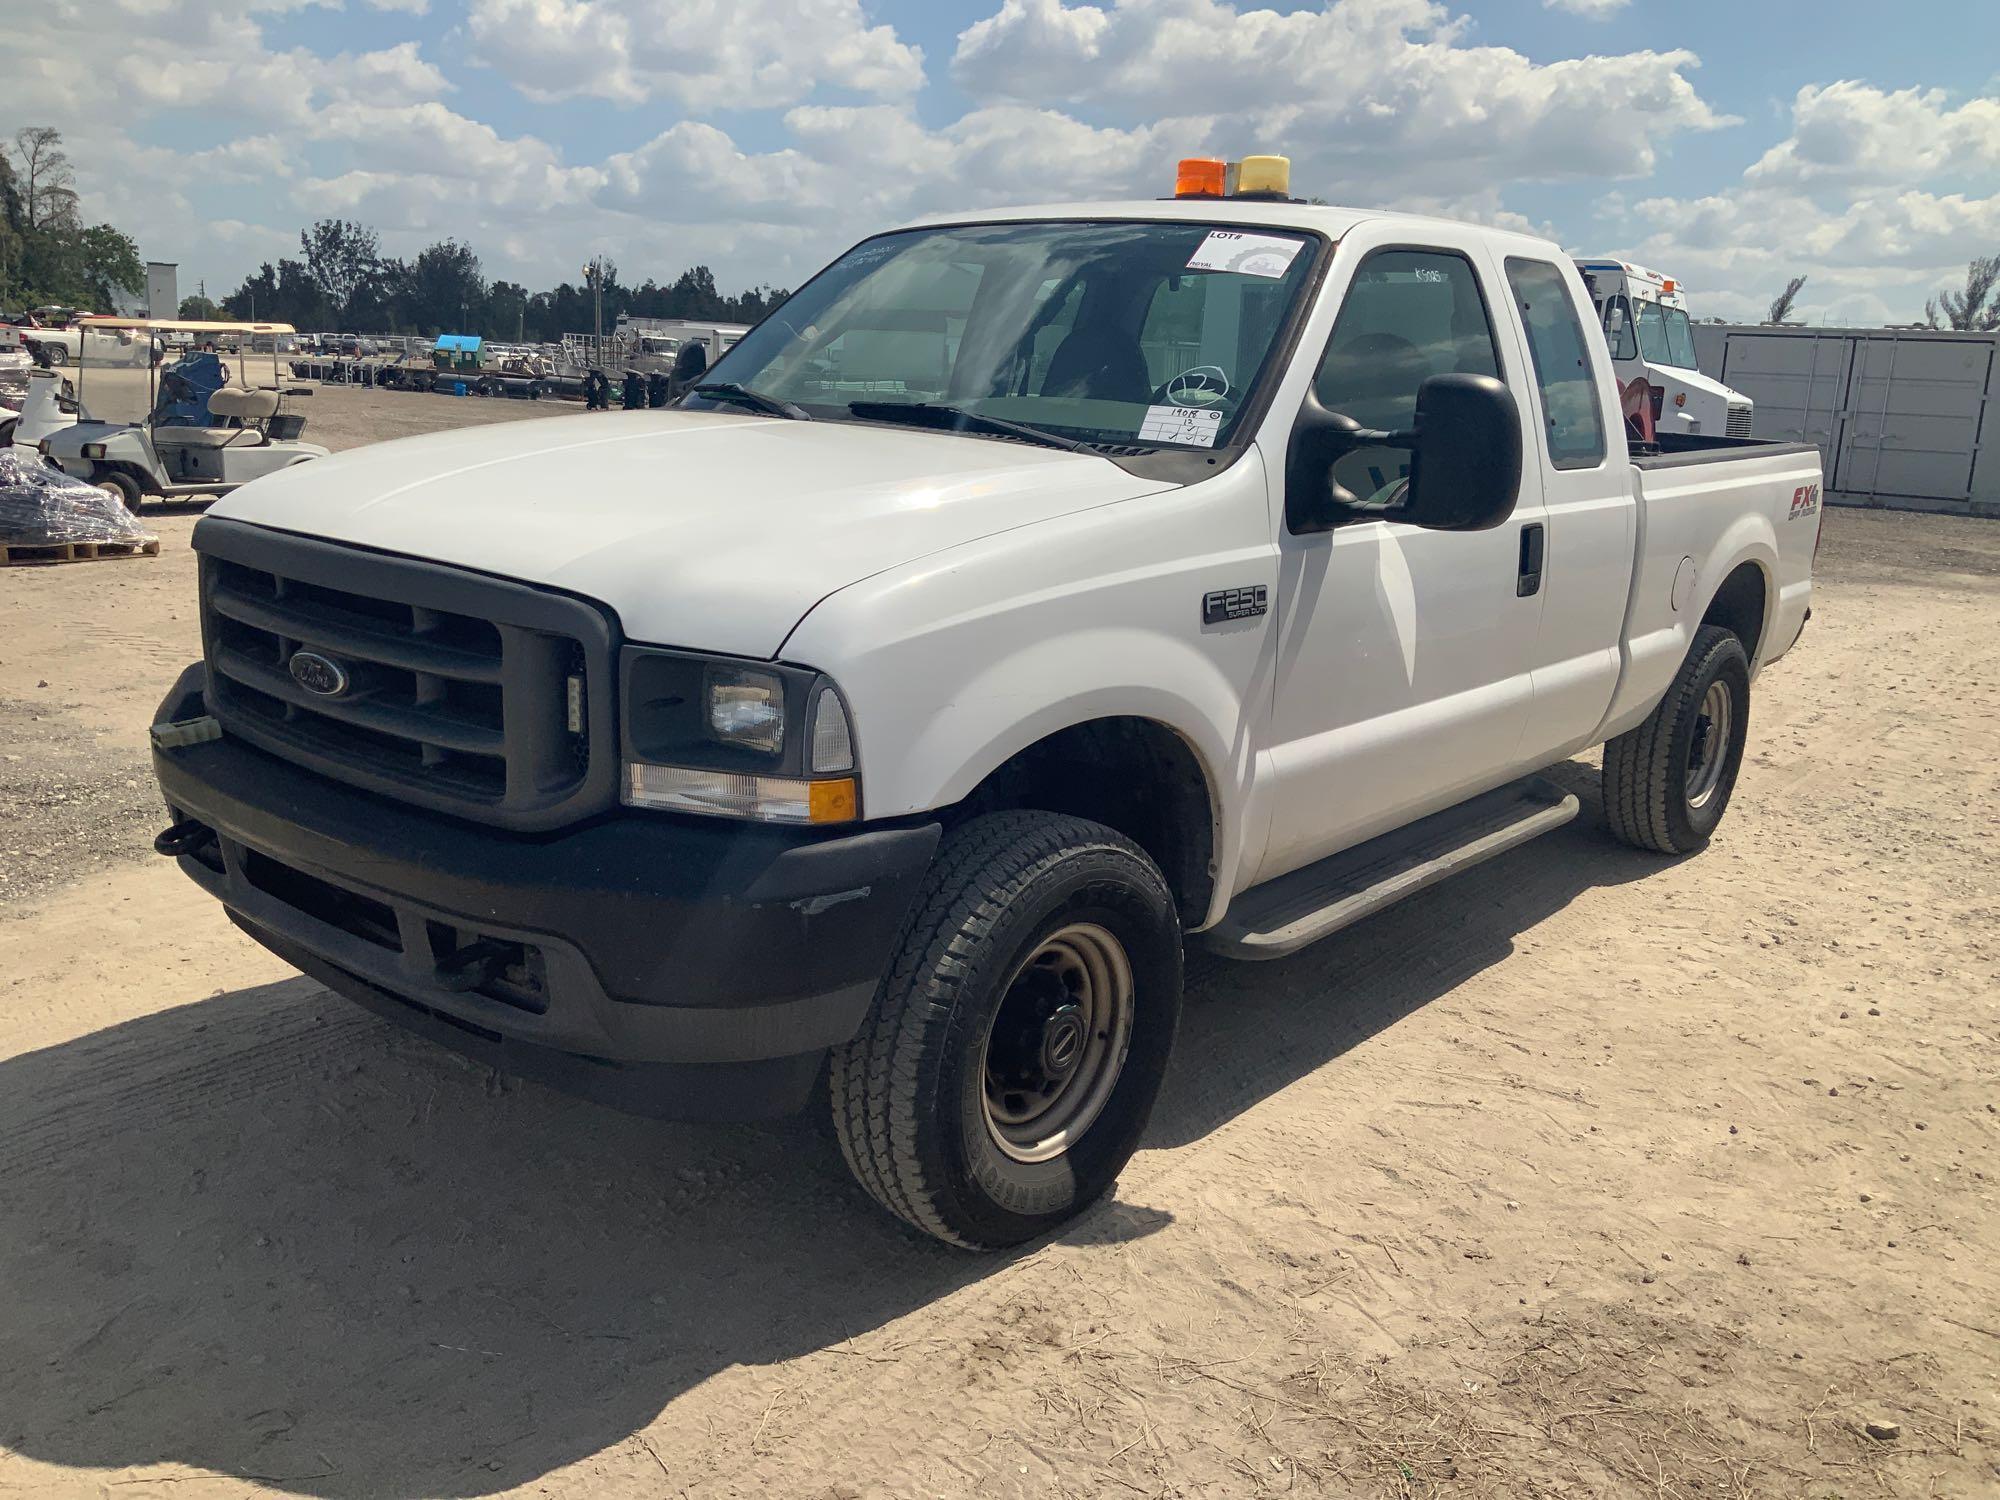 2003 Ford F-250 4x4 Extended Cab Pickup Truck